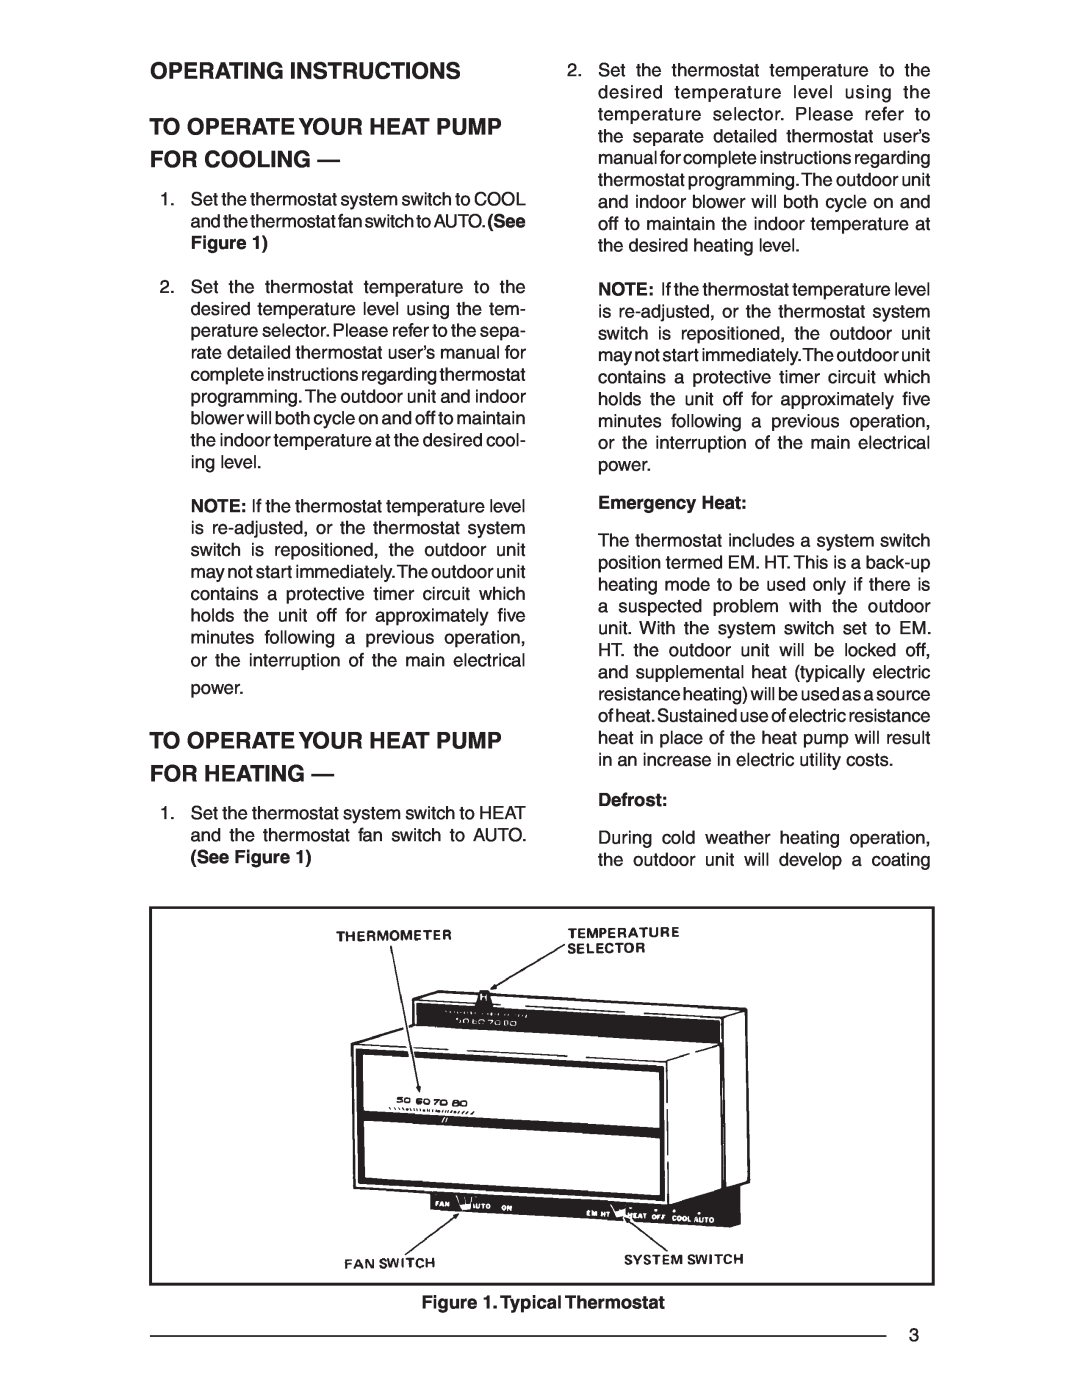 Nordyne R-410A Operating Instructions, To Operate Your Heat Pump For Cooling, To Operate Your Heat Pump For Heating 